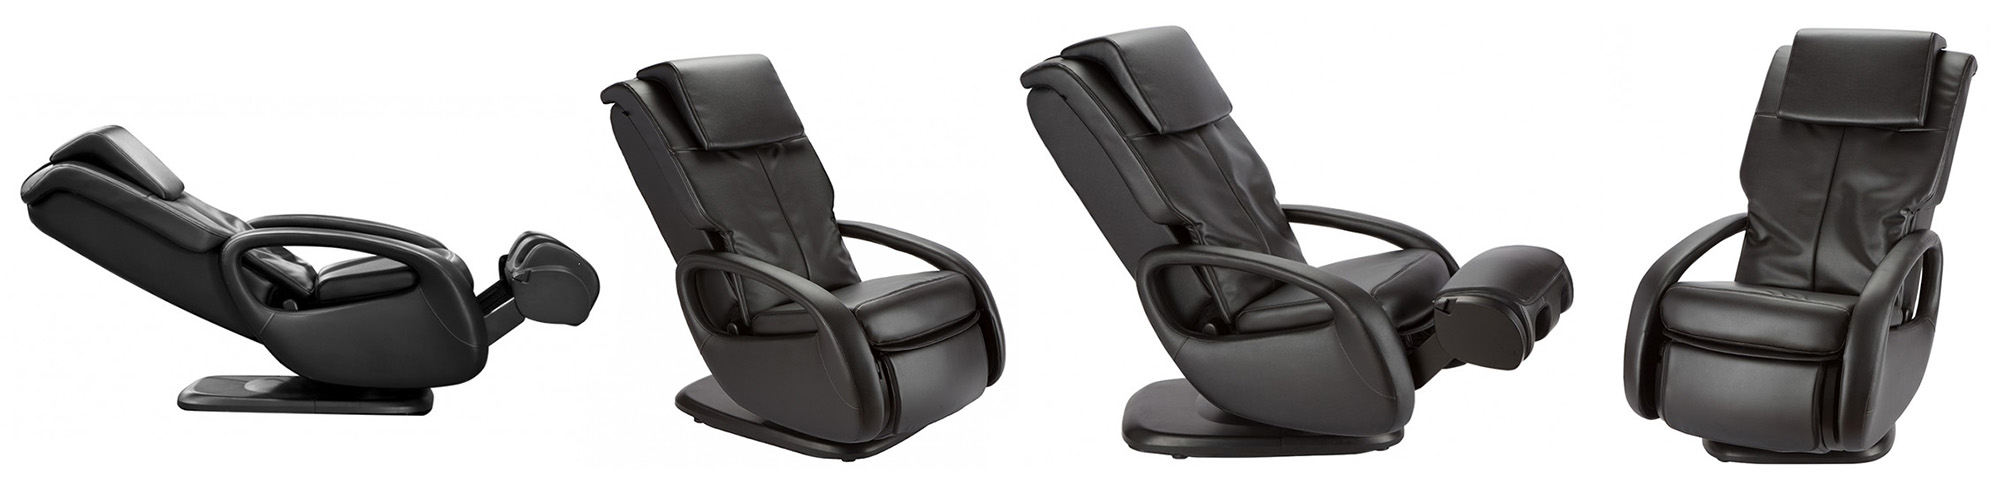 Human Touch Wholebody 5 1 Massage Chair Swivel Recliner 45915825775 Ebay